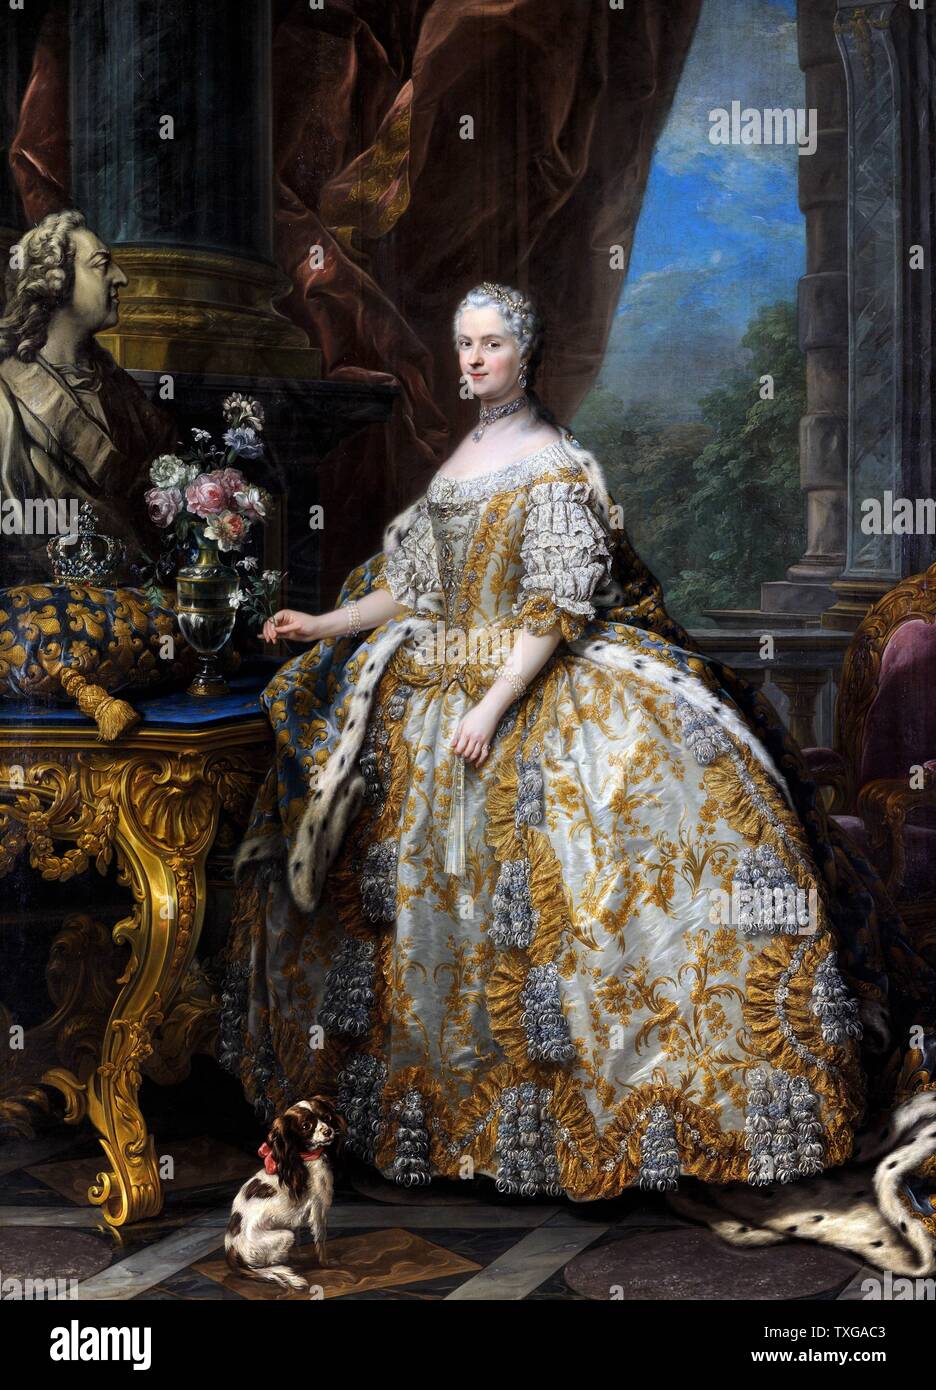 Charles Andre van Loo known as Carle van Loo French school Marie Leszcinska, Queen of France 1747 Oil on canvas (274 x 193 cm) Versailles, Museum of the Castle Stock Photo